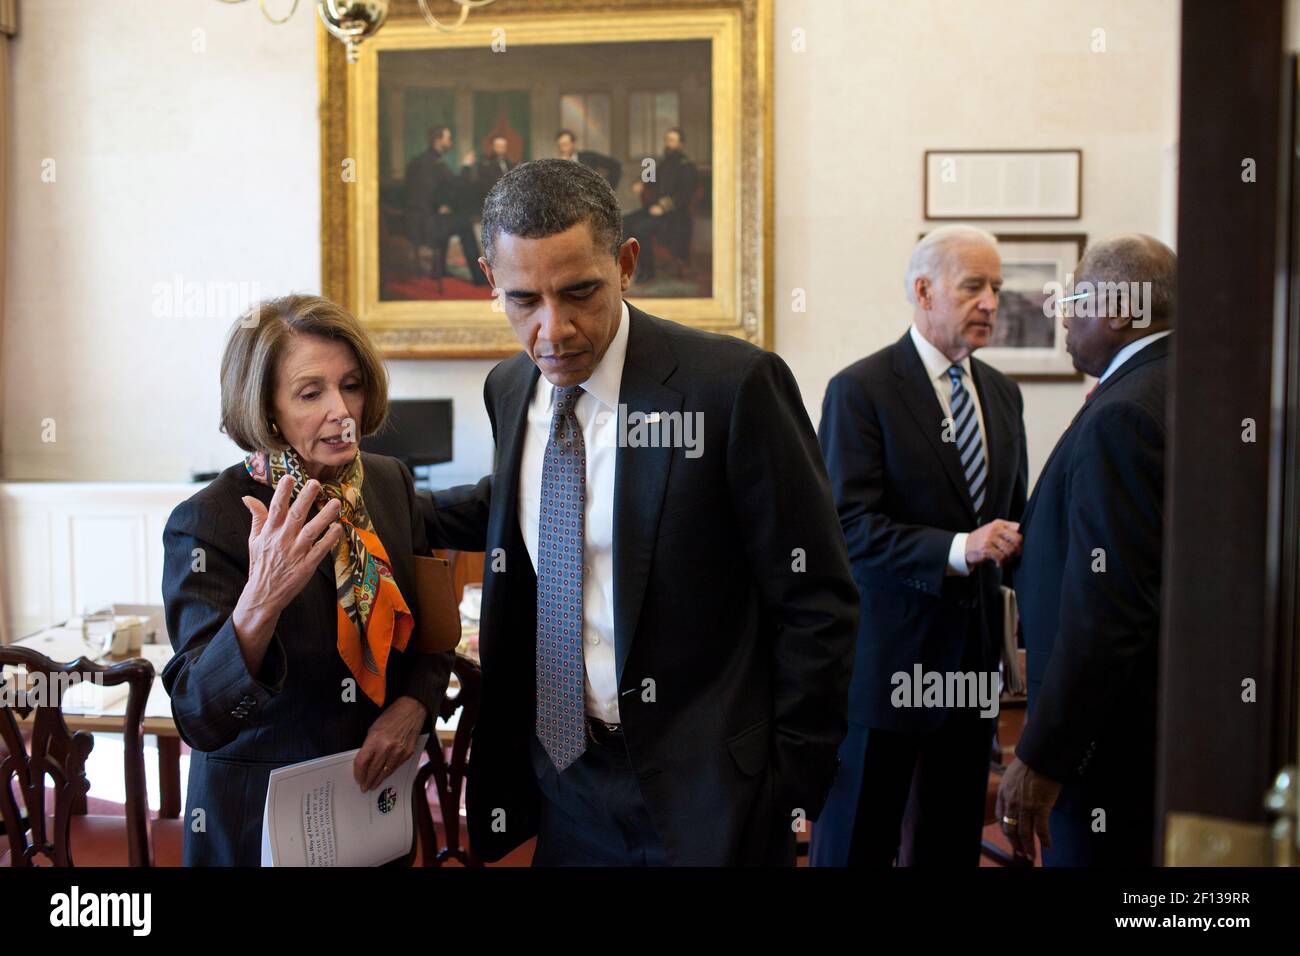 President Barack Obama talks with House Minority Leader Nancy Pelosi D-Calif. as Vice President Joe Biden talks with Rep. James Clyburn D-S.C. after a lunch with the Democratic House leadership in the Oval Office Private Dining Room Feb. 17 2011. Stock Photo